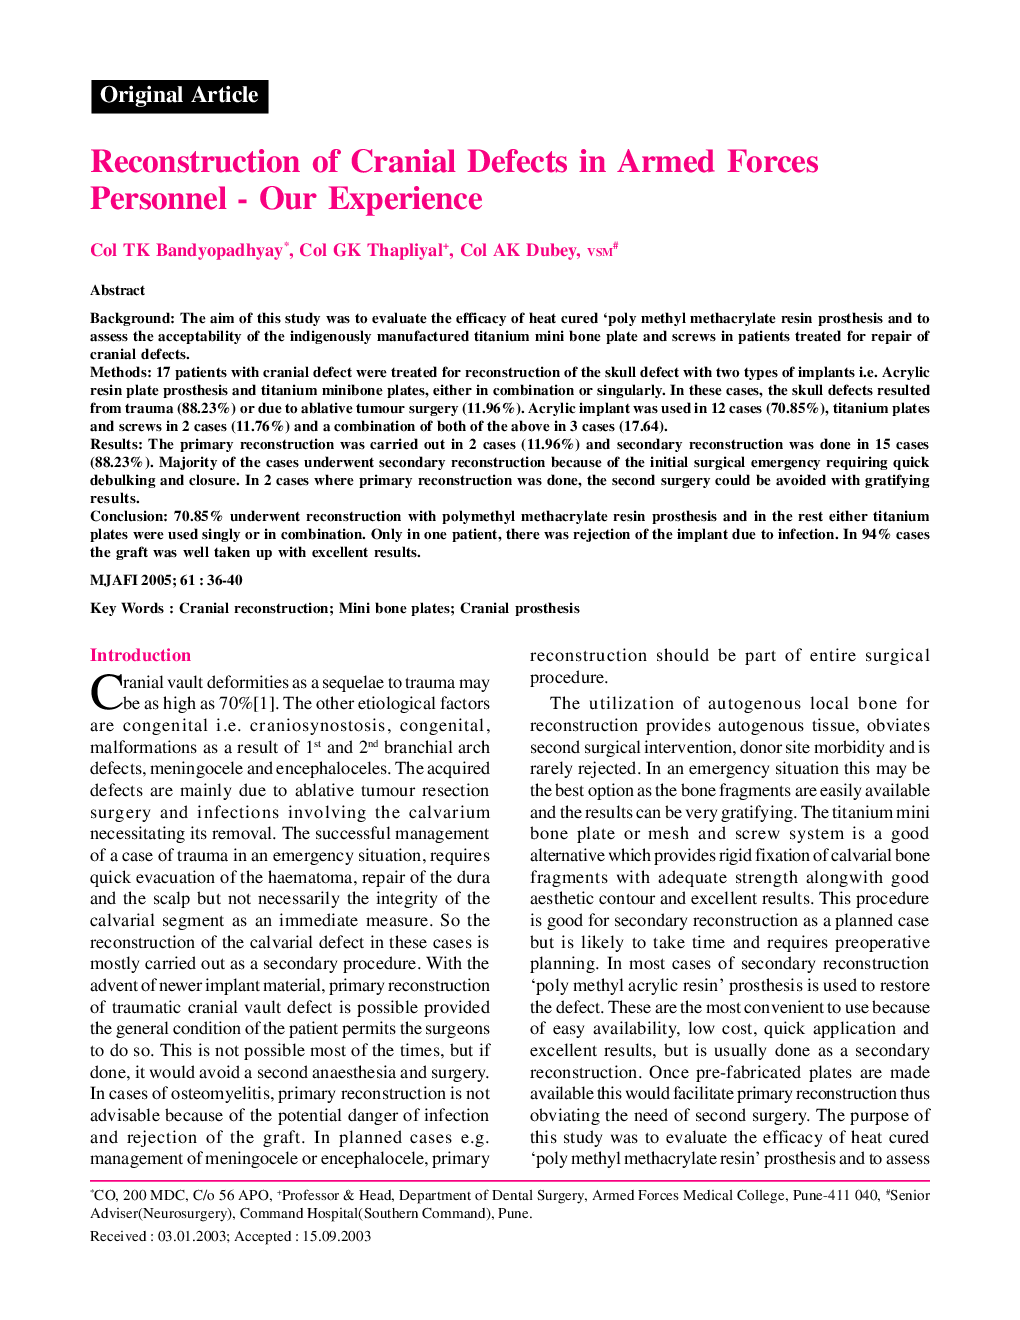 Reconstruction of Cranial Defects in Armed Forces Personnel - Our Experience